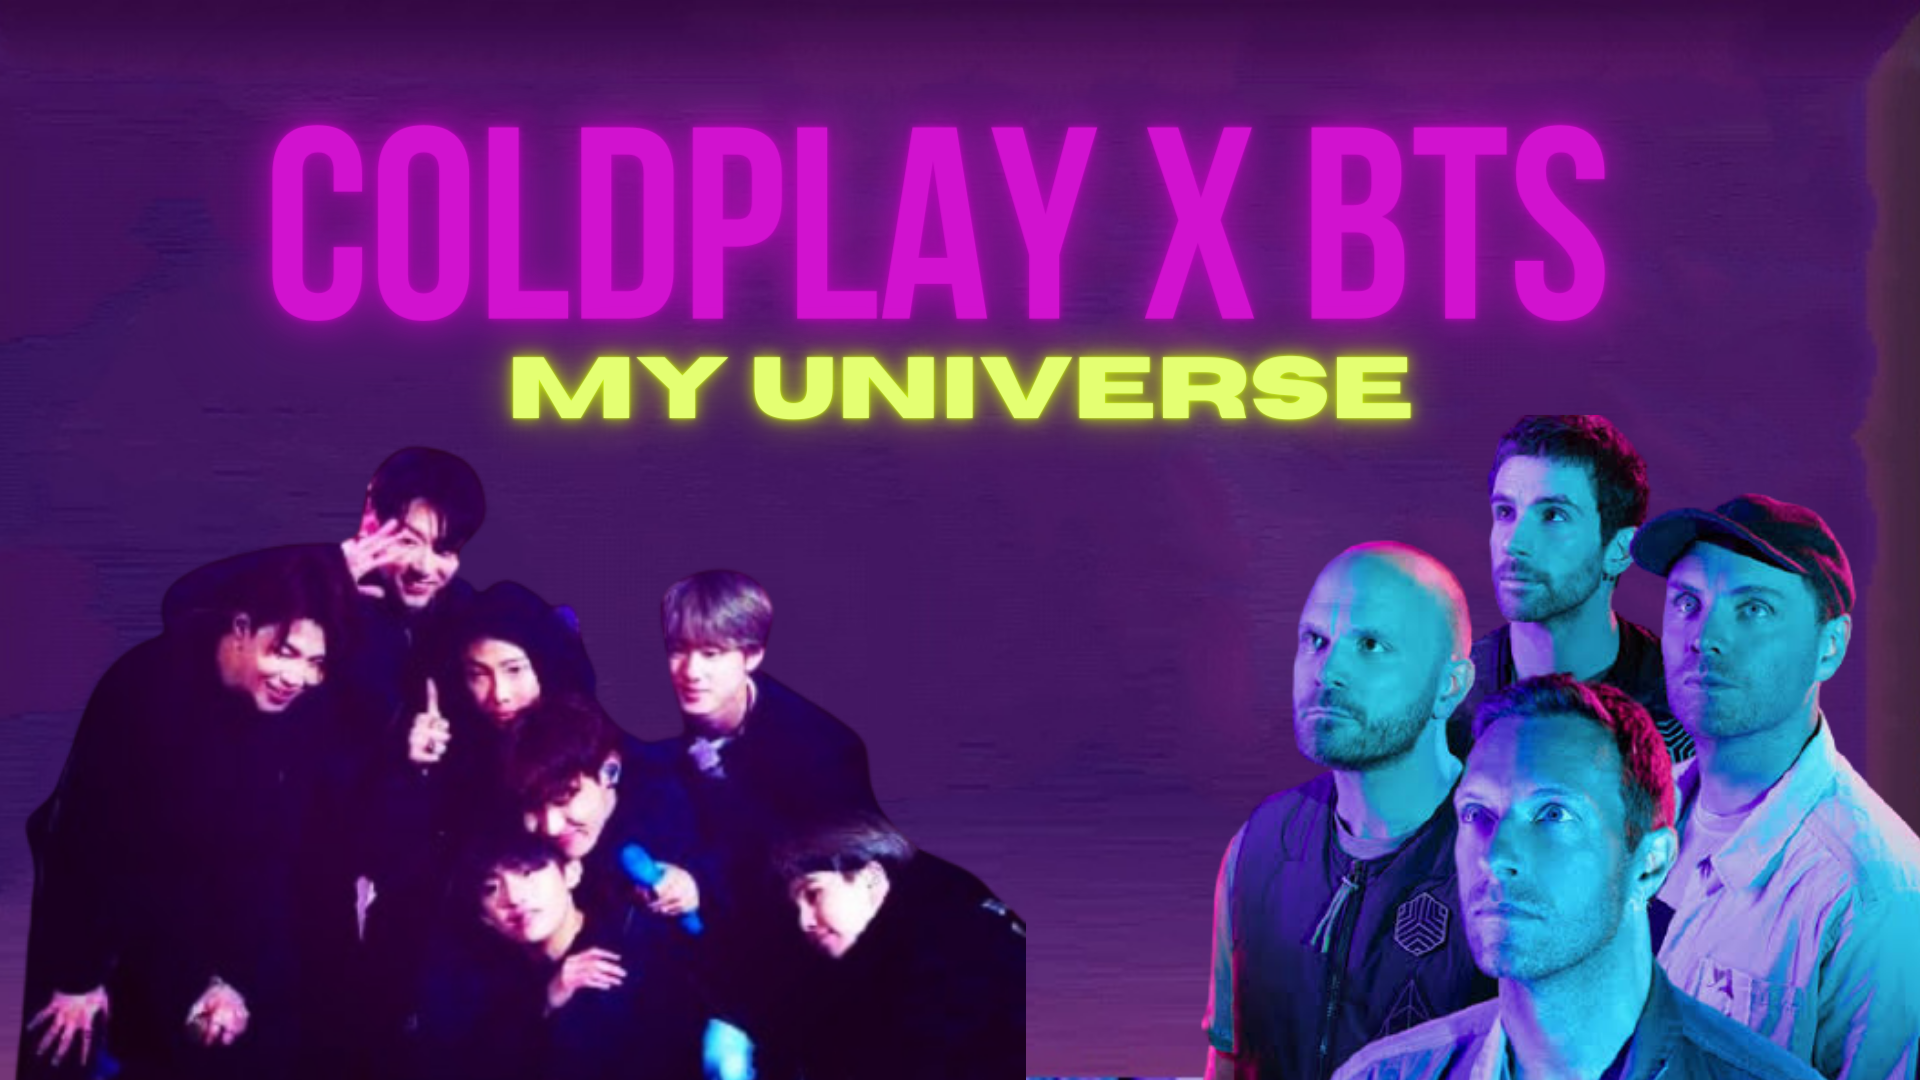 just a simple edit i made for MY UNIVERSE COLDPLAY x BTS